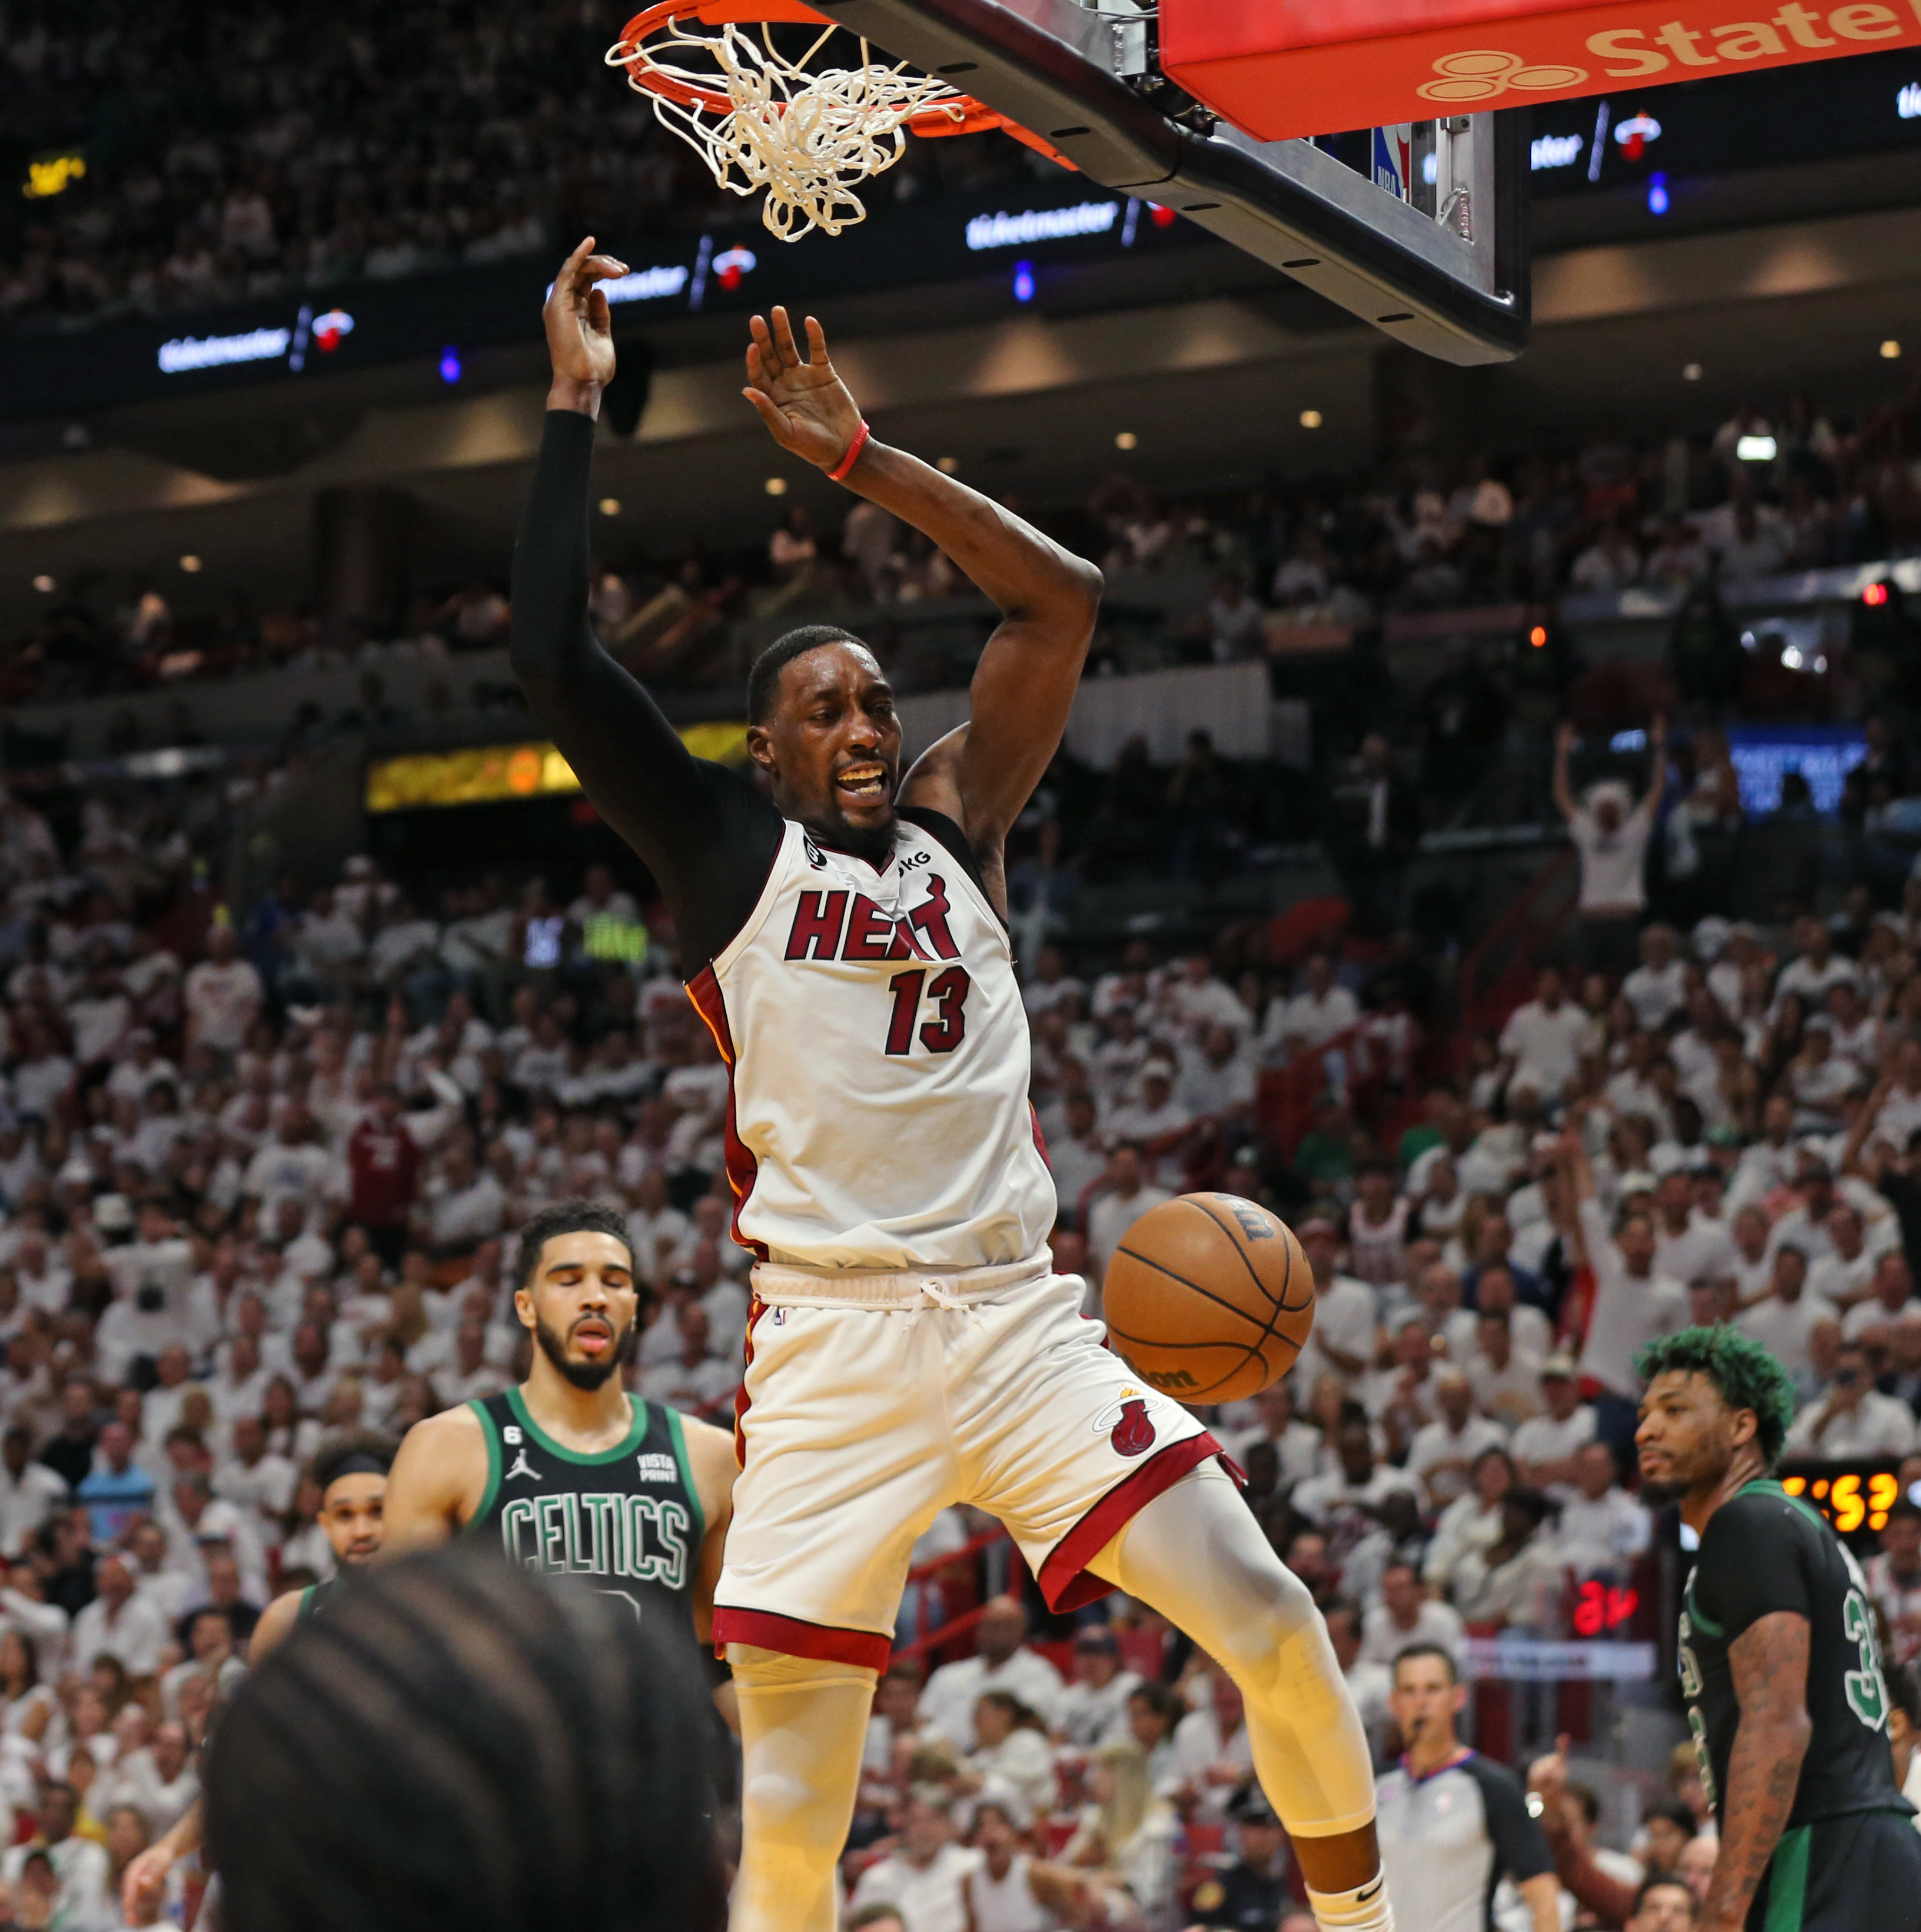 Heat Mock Celtics After Embarrassing Collapse Leads to Loss